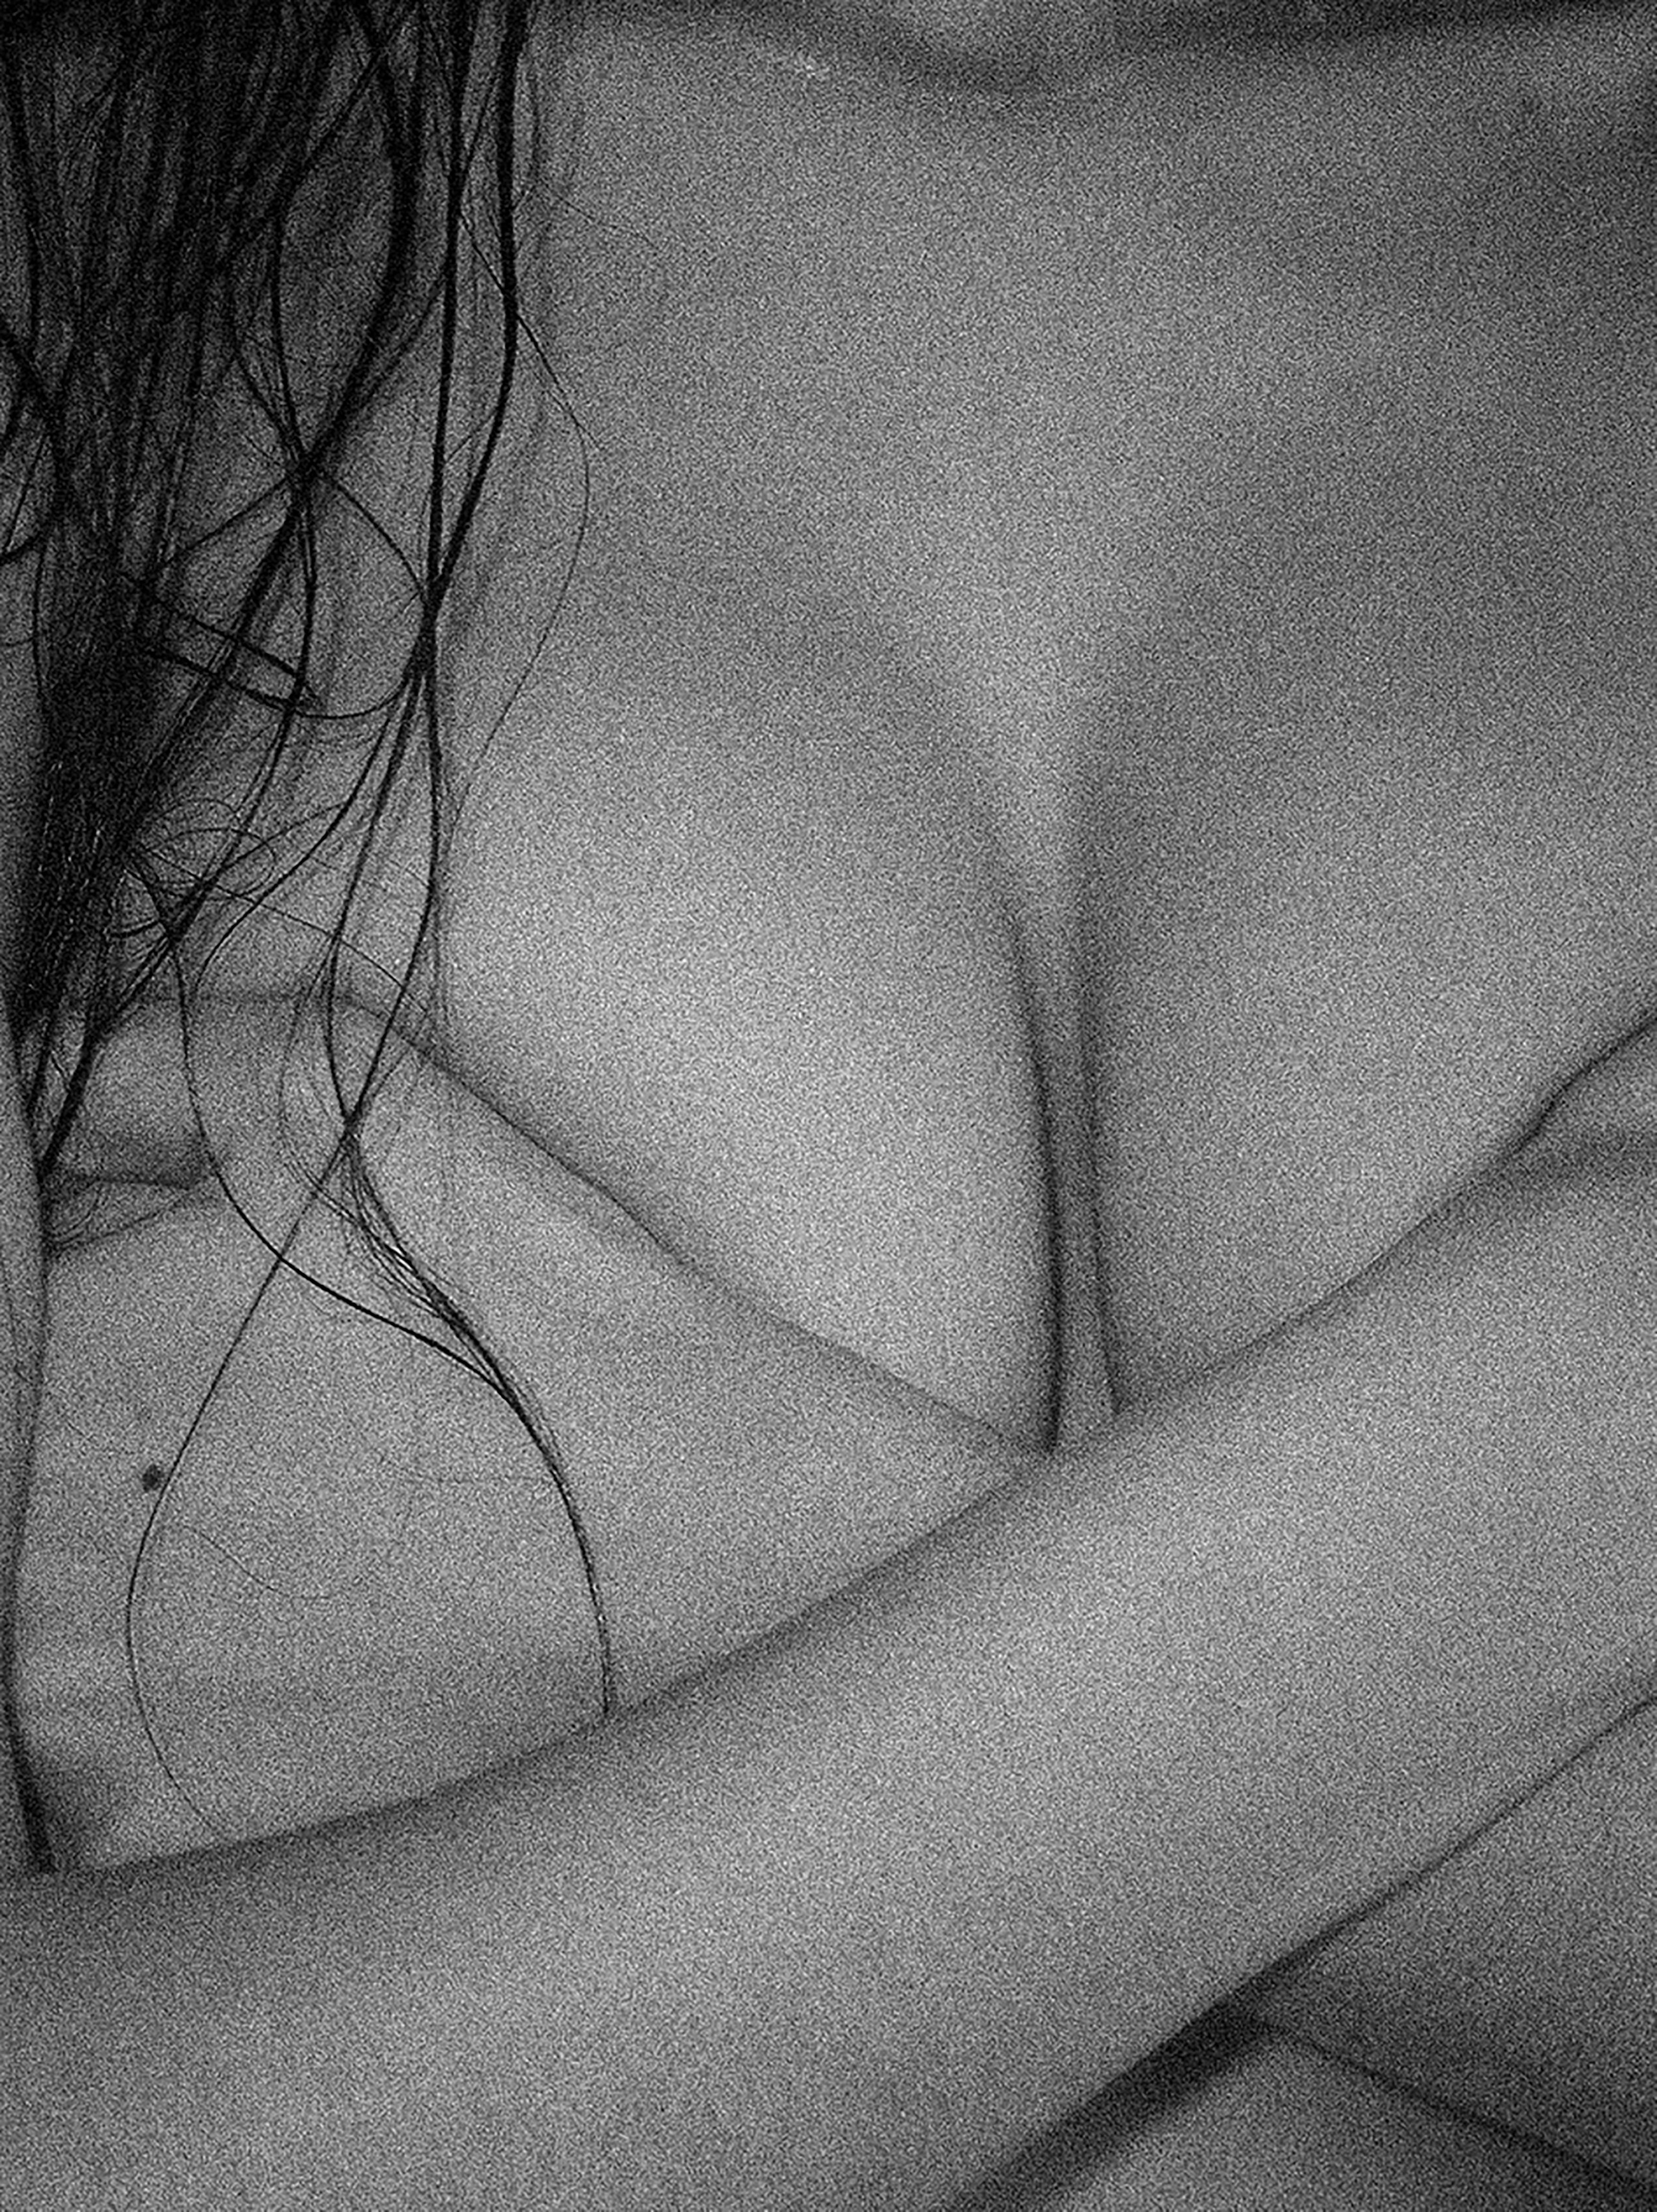 Black And White Closeup Of Woman's Beautiful Small Breast Stock